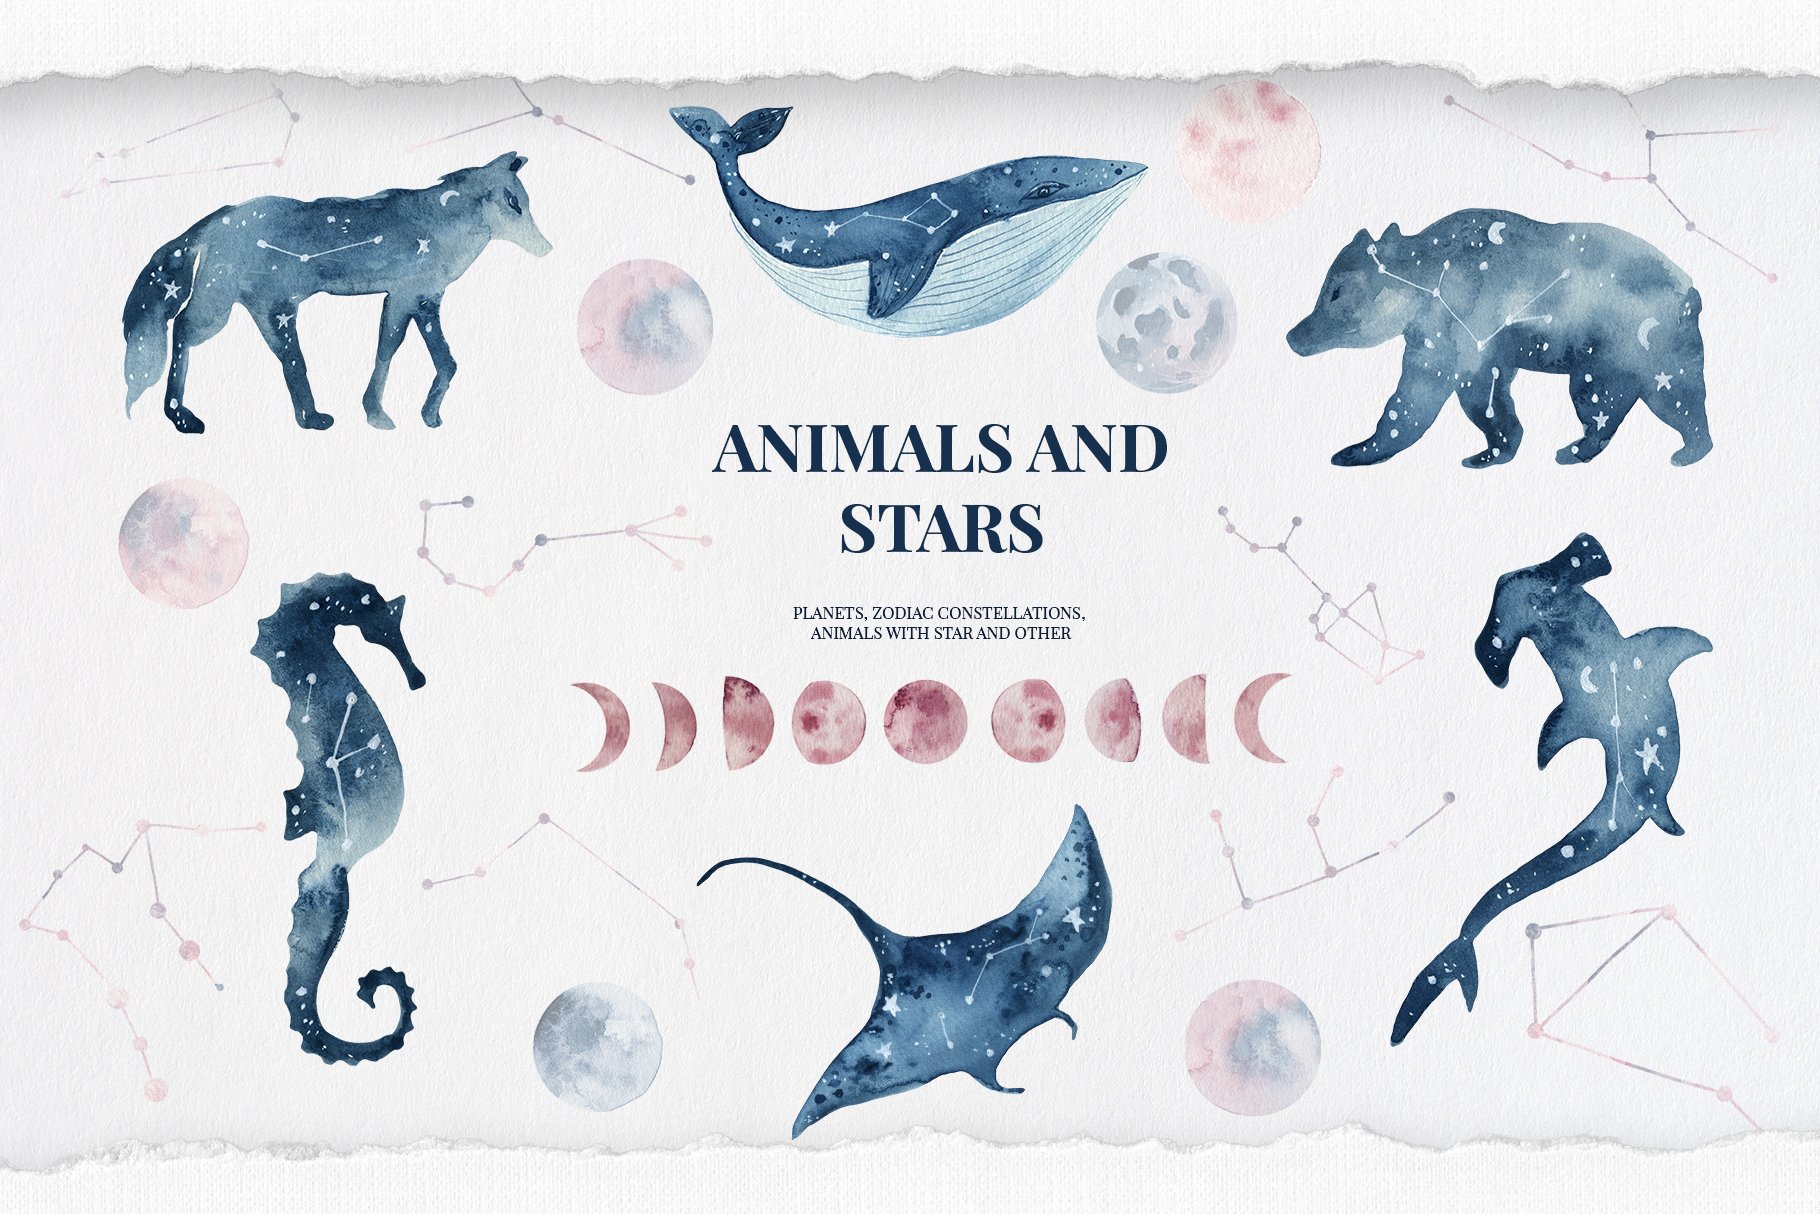 Animals and stars collection cover image.